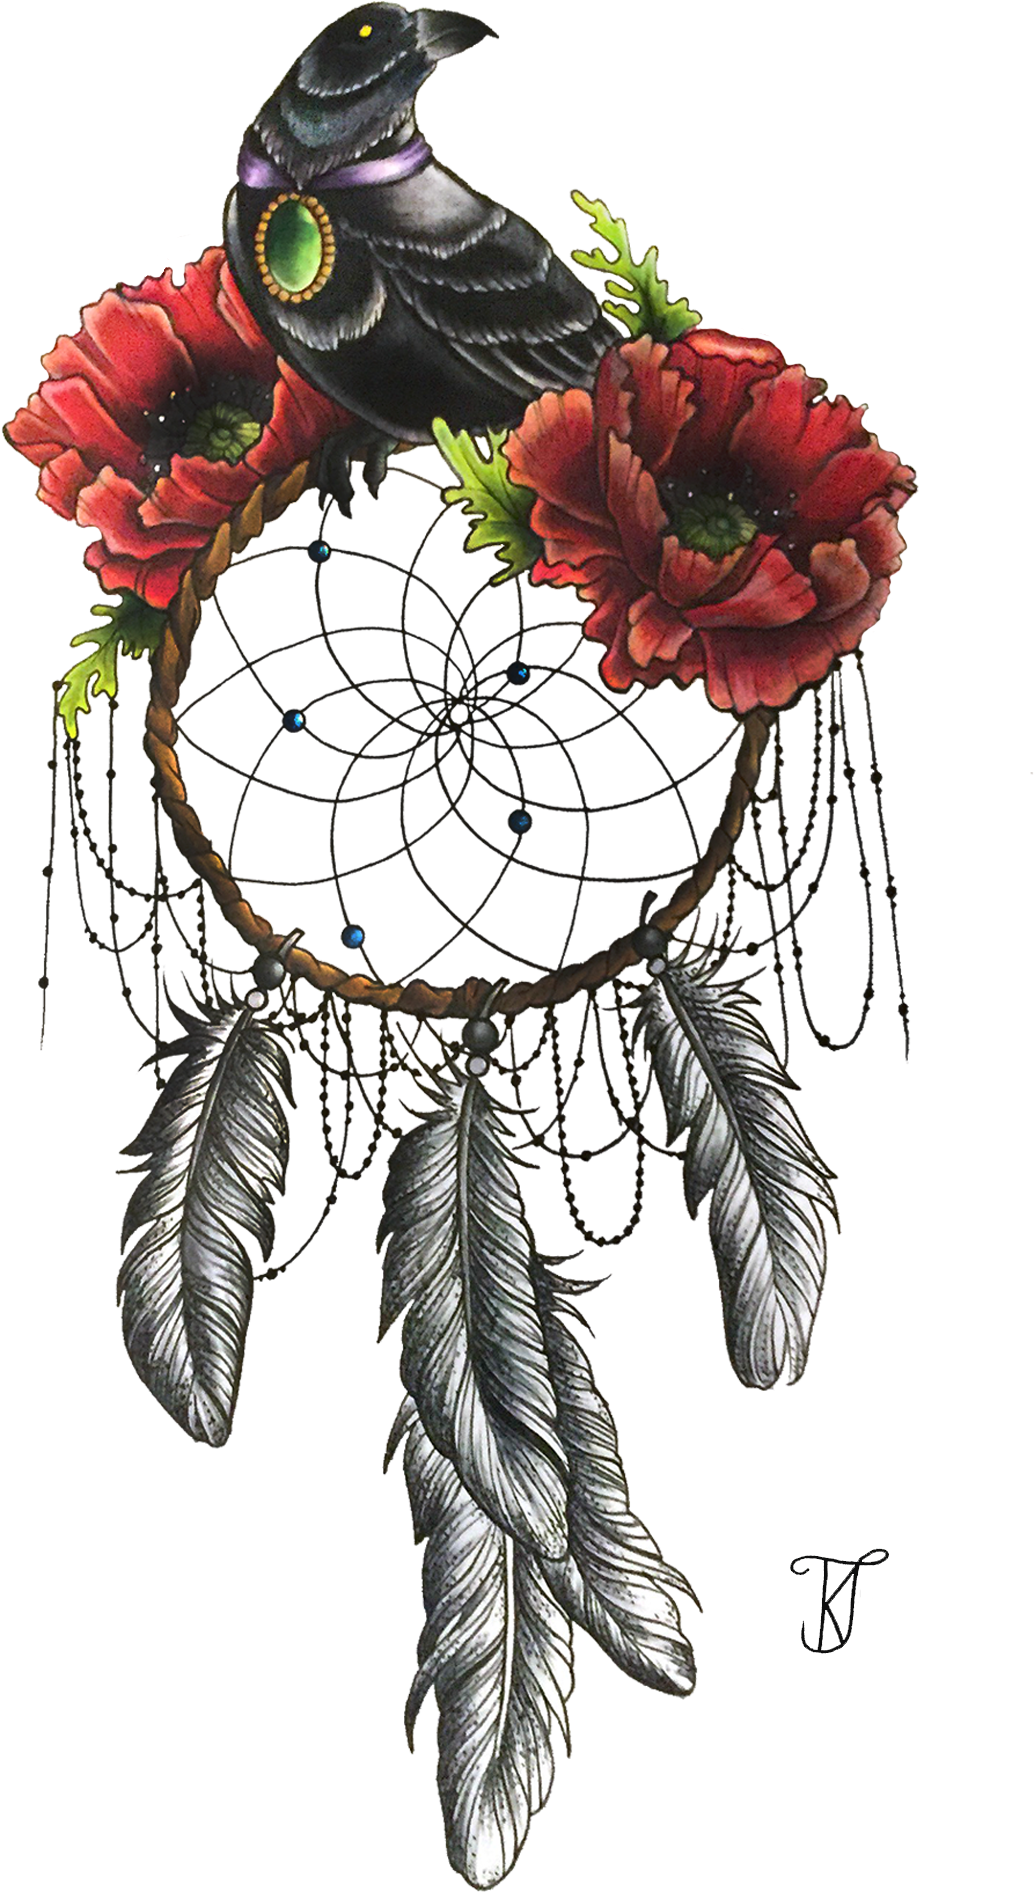 A Dream Catcher With Flowers And Feathers